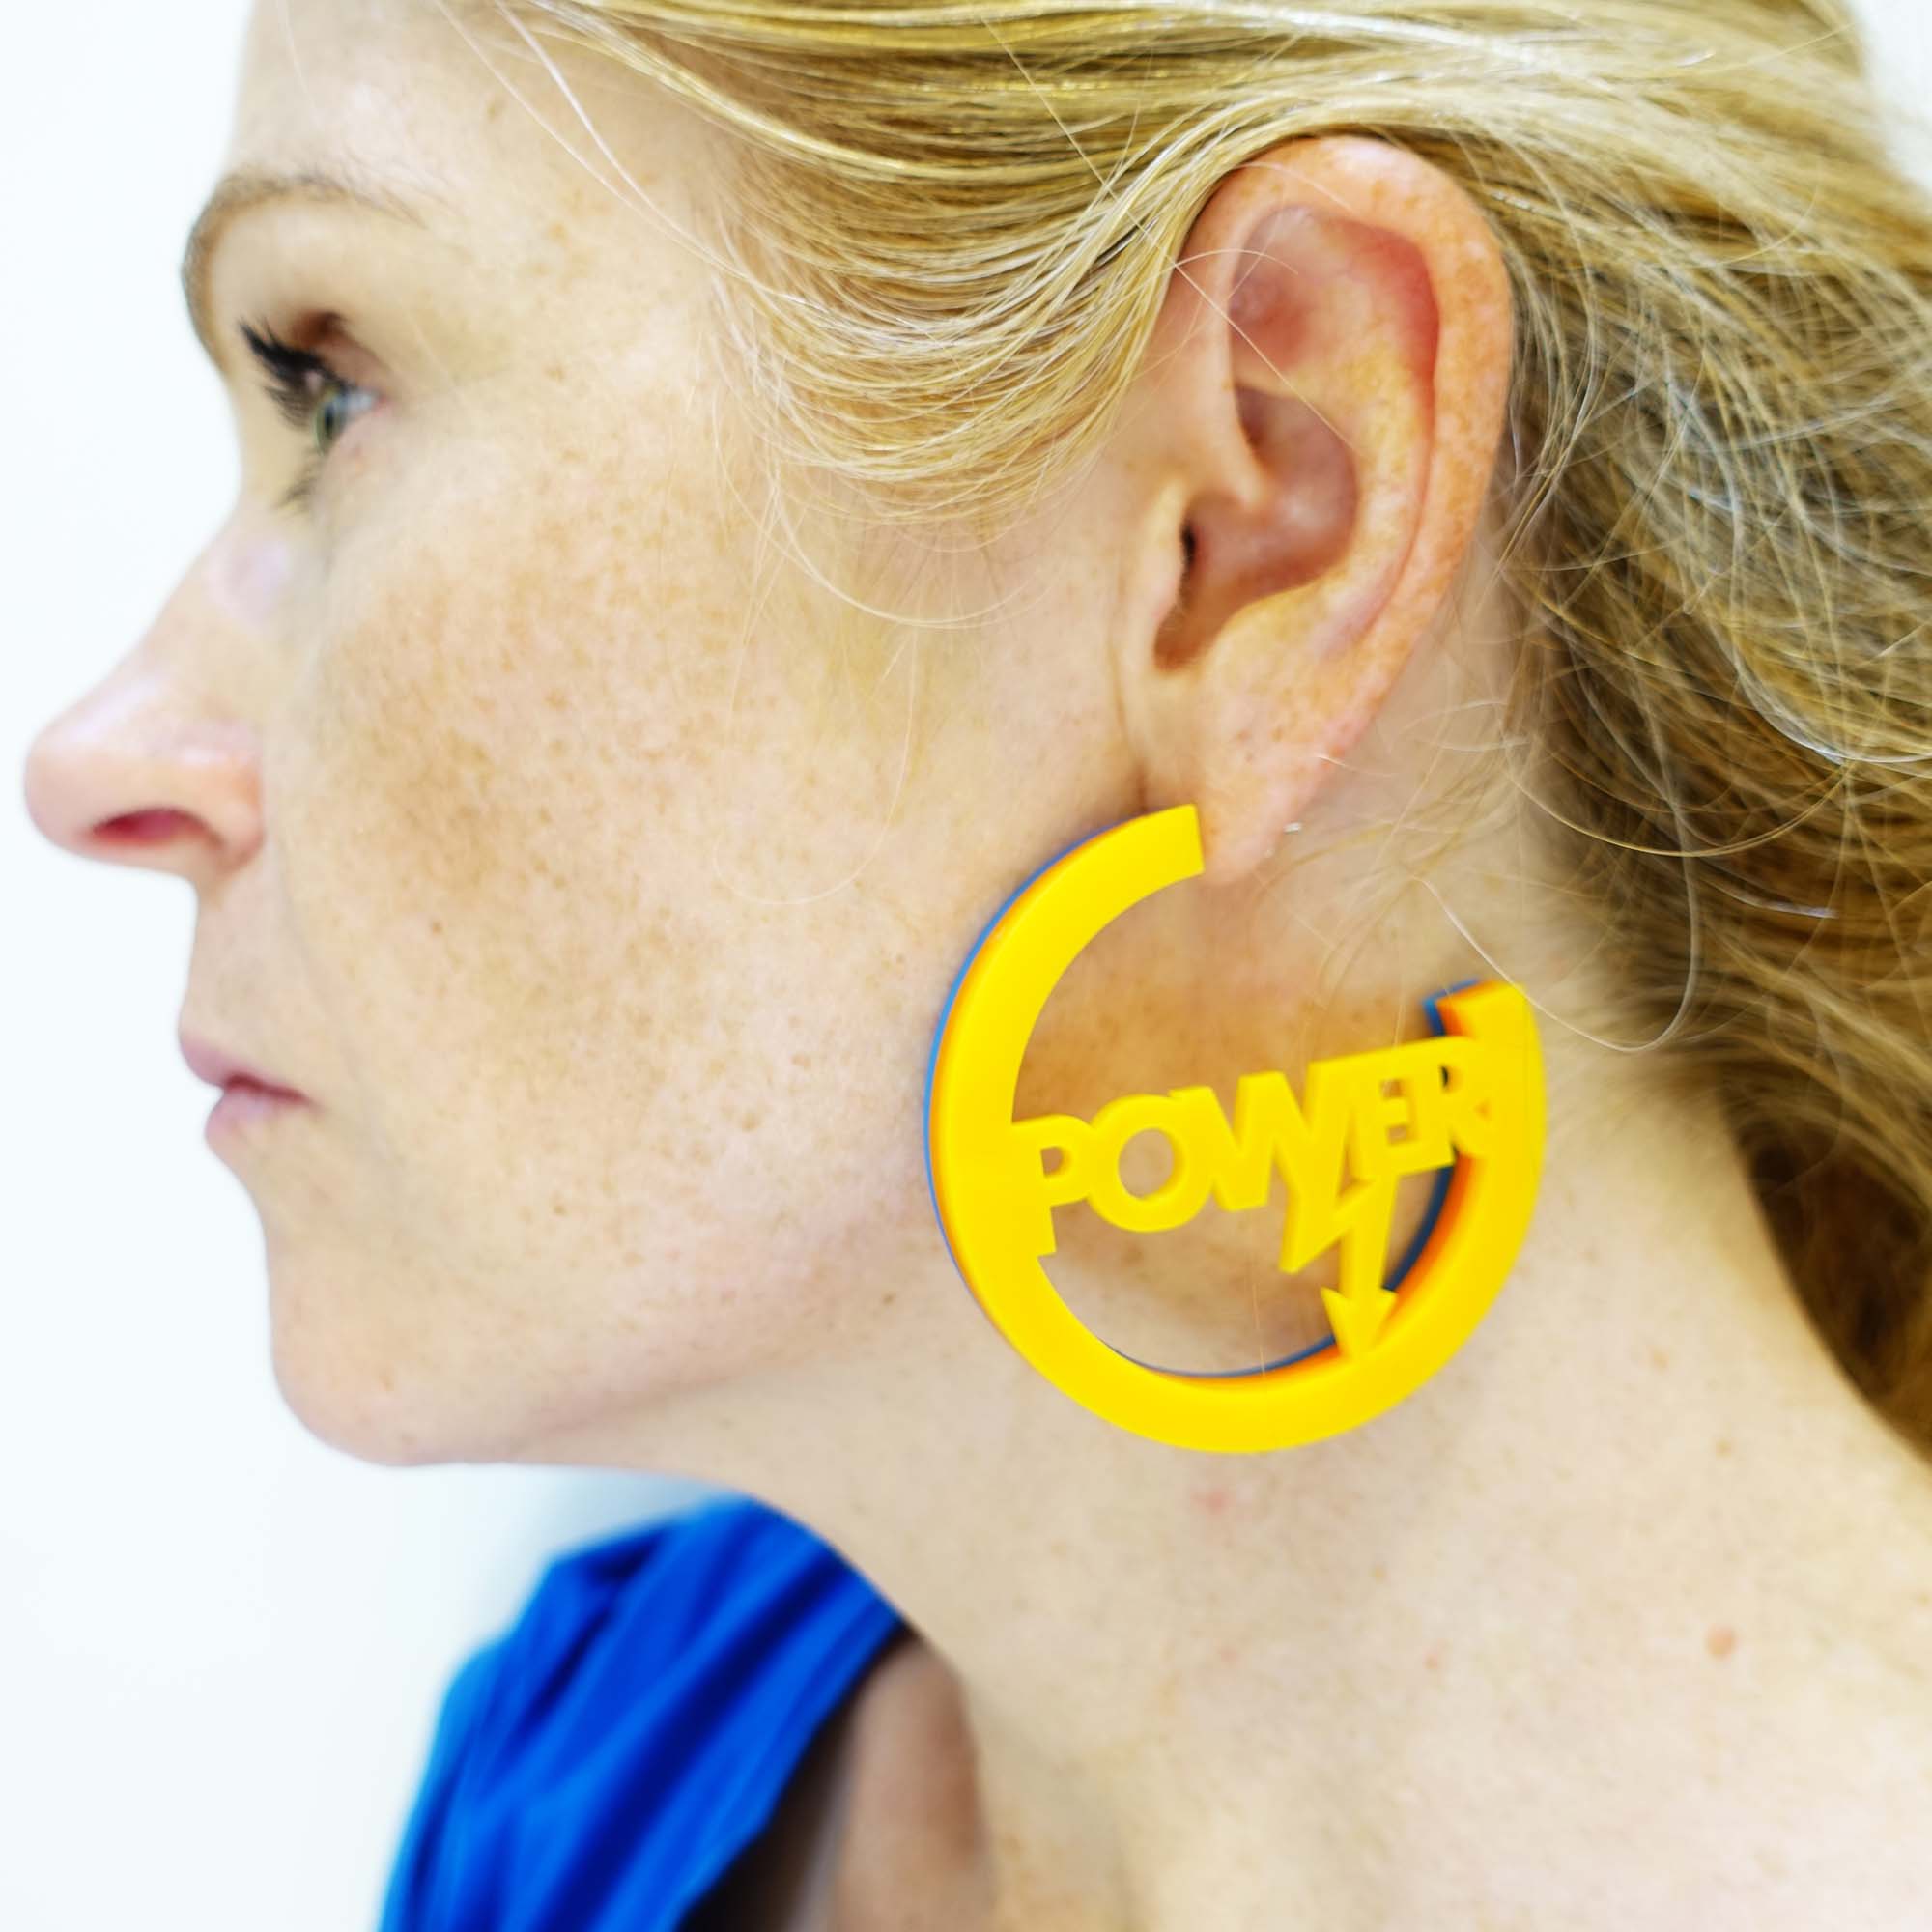 model wears Roller Disco sunflower yellow orange and blue Suffragette trio in Parma violet, white and avocado Mary Beard Women & Power earrings, statement hoops